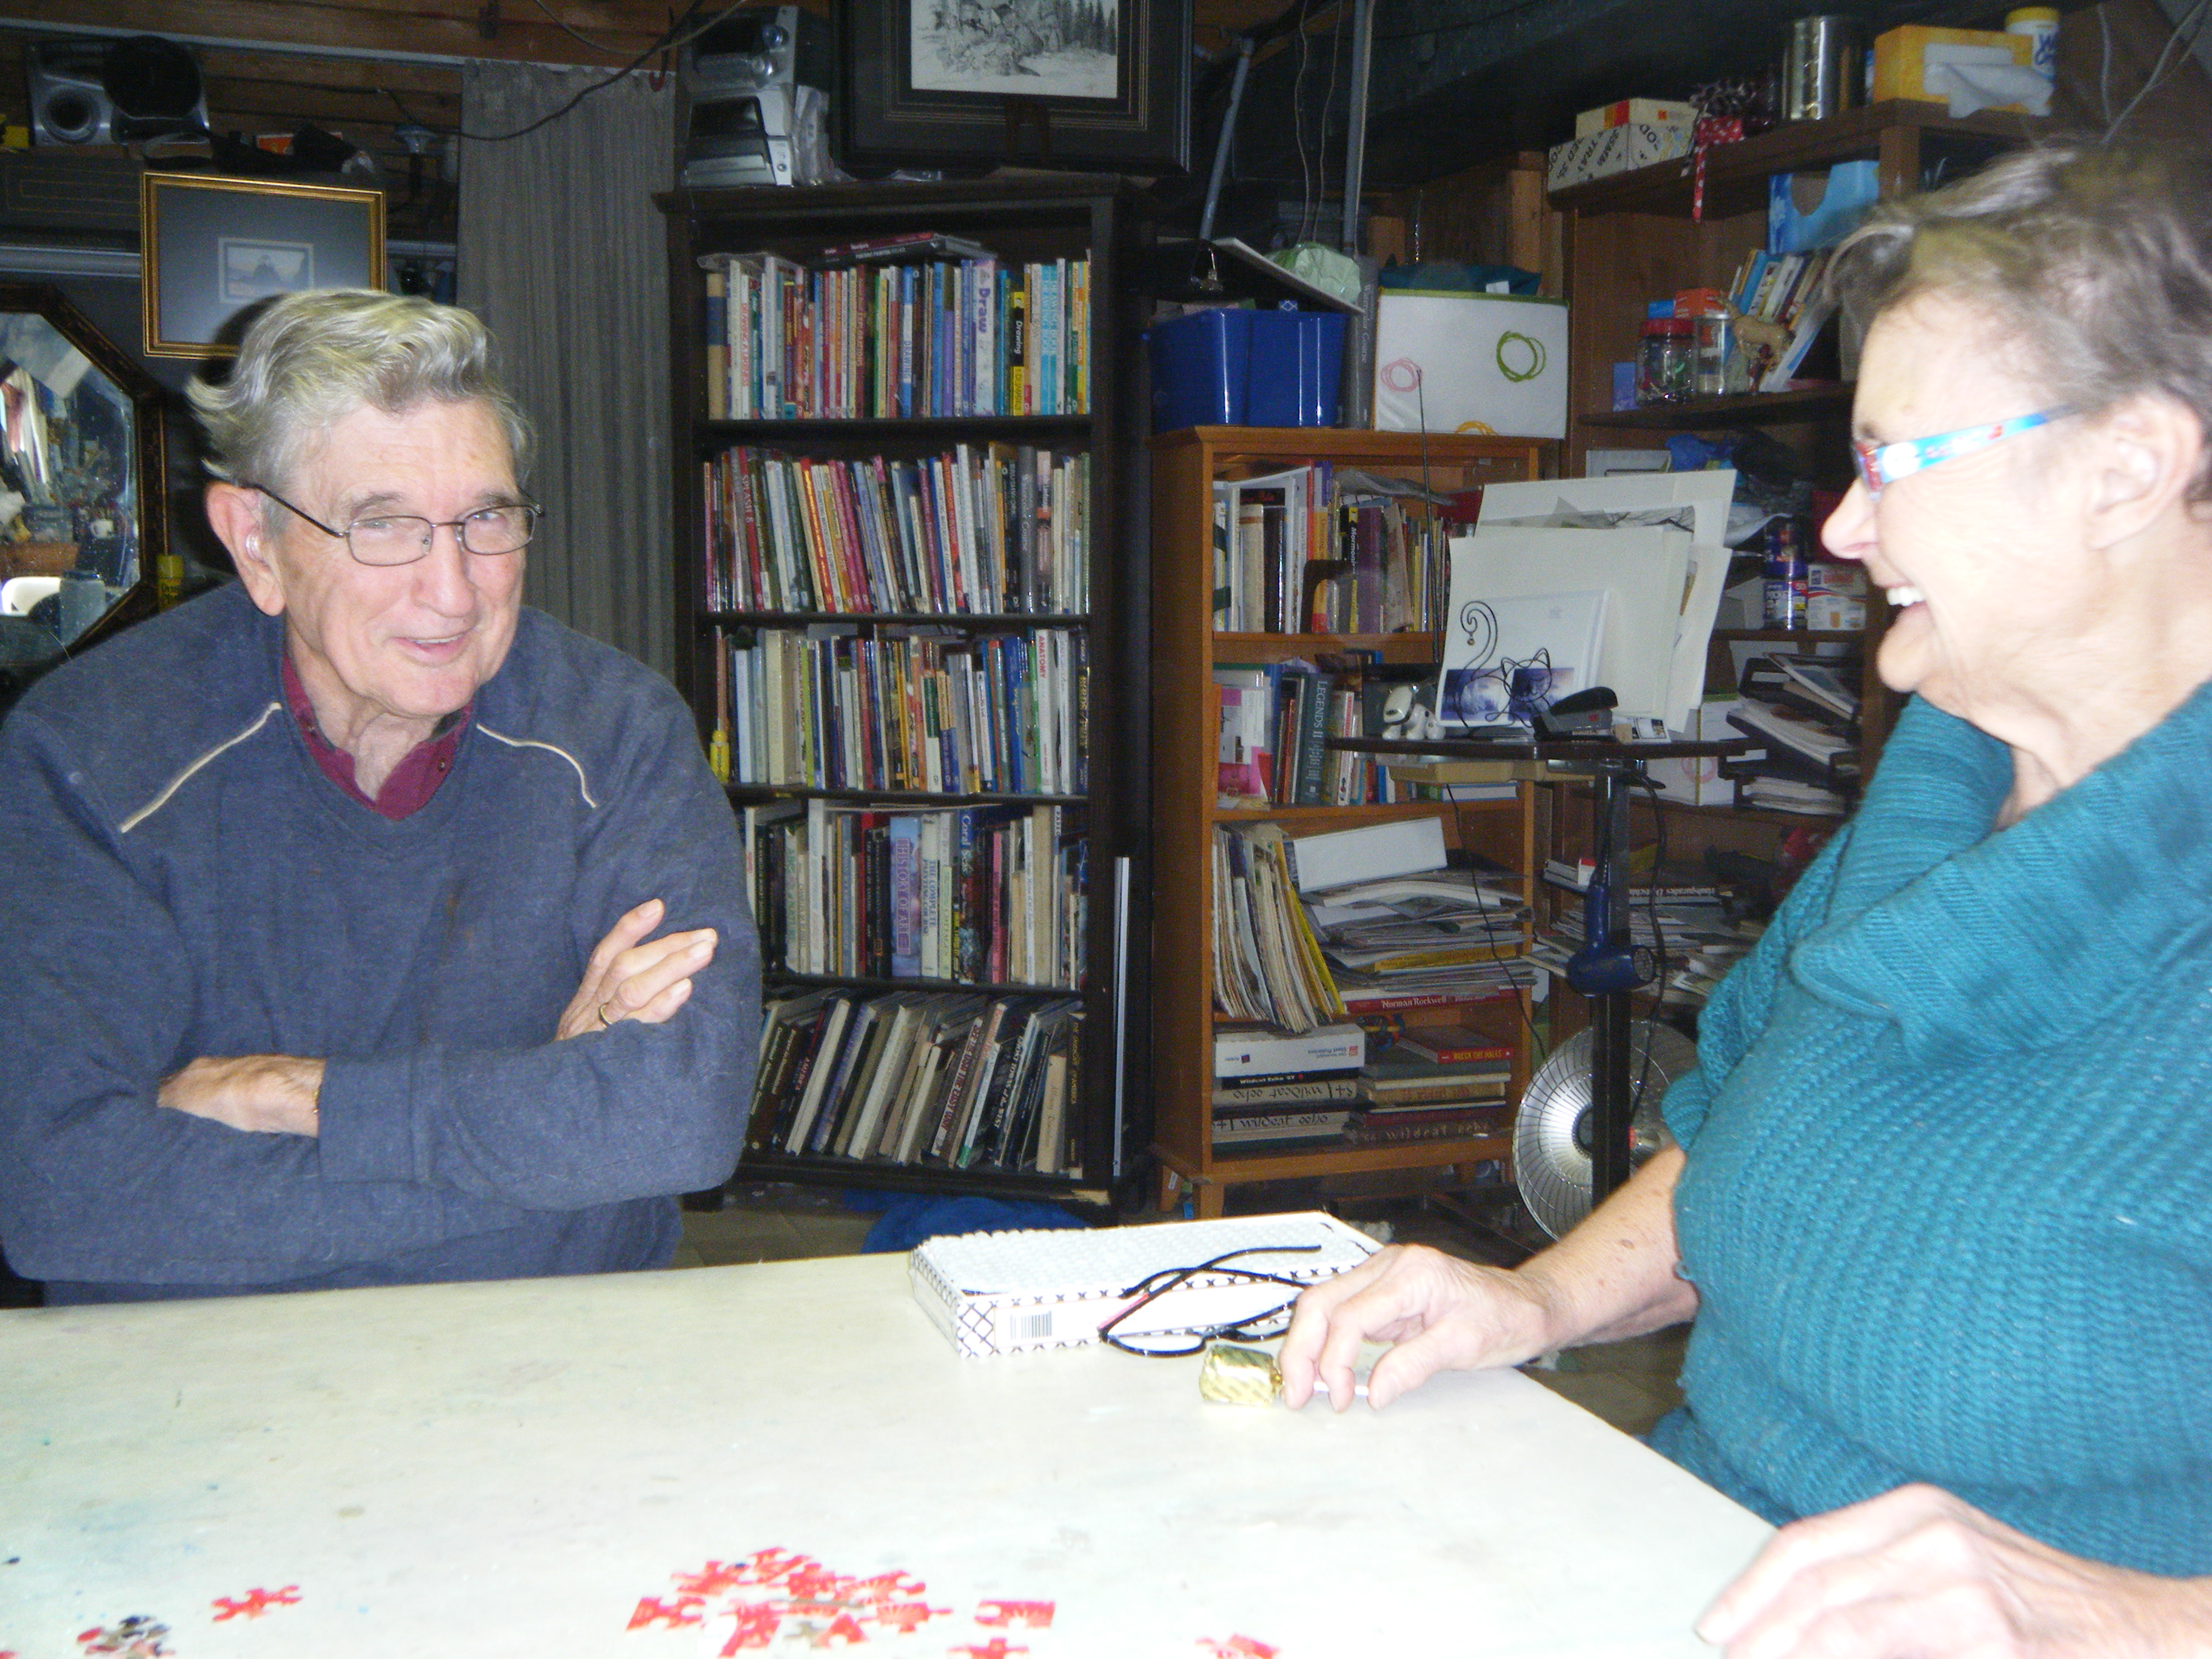 Don and Gay, doing a jigsaw puzzle - March 2009